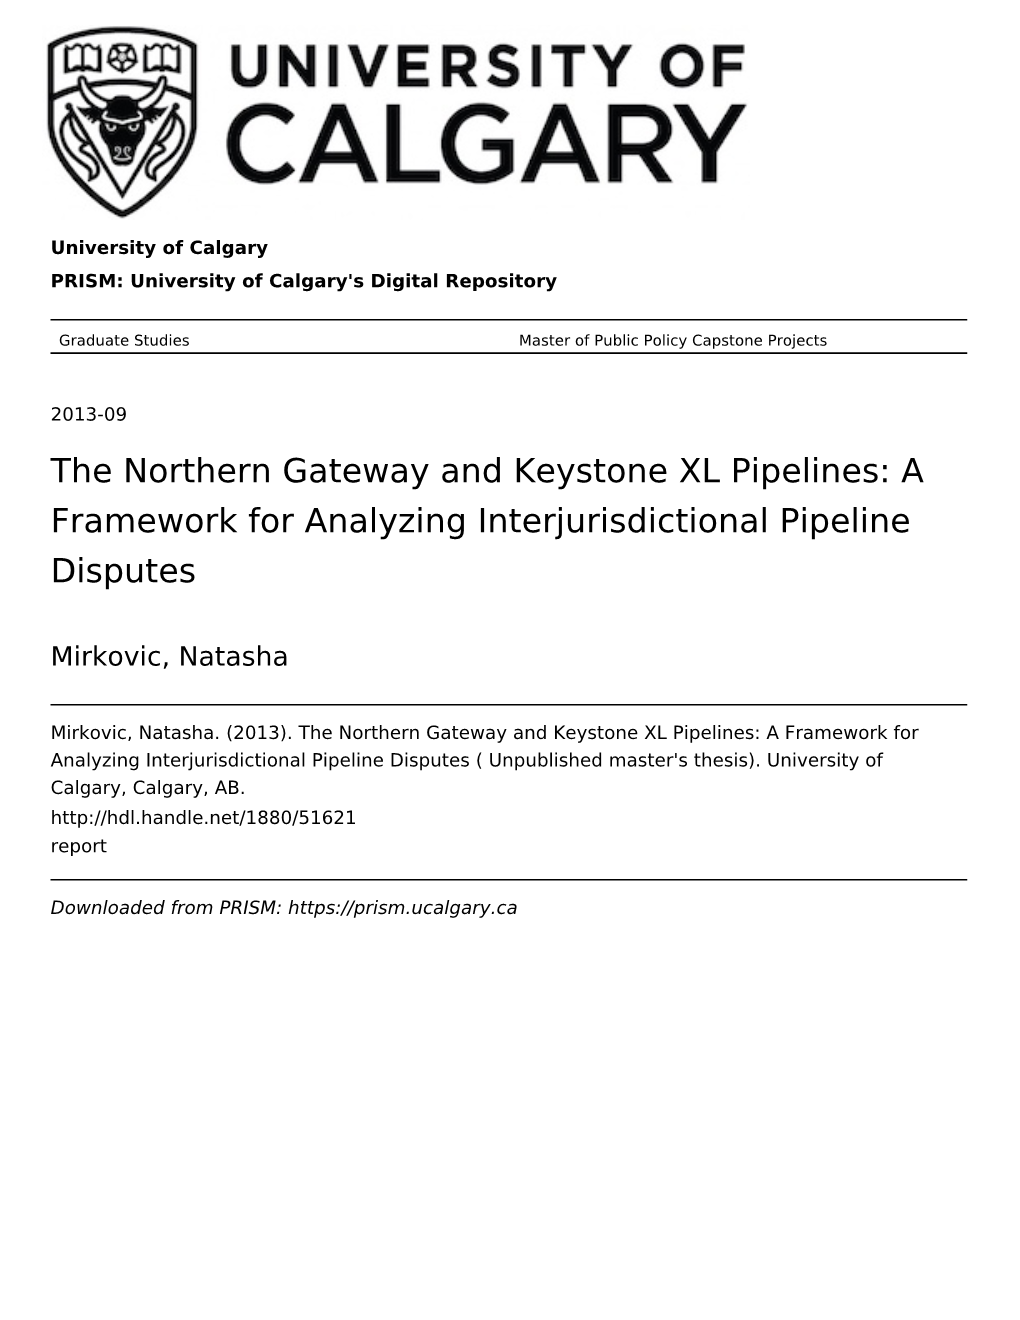 The Northern Gateway and Keystone XL Pipelines: a Framework for Analyzing Interjurisdictional Pipeline Disputes